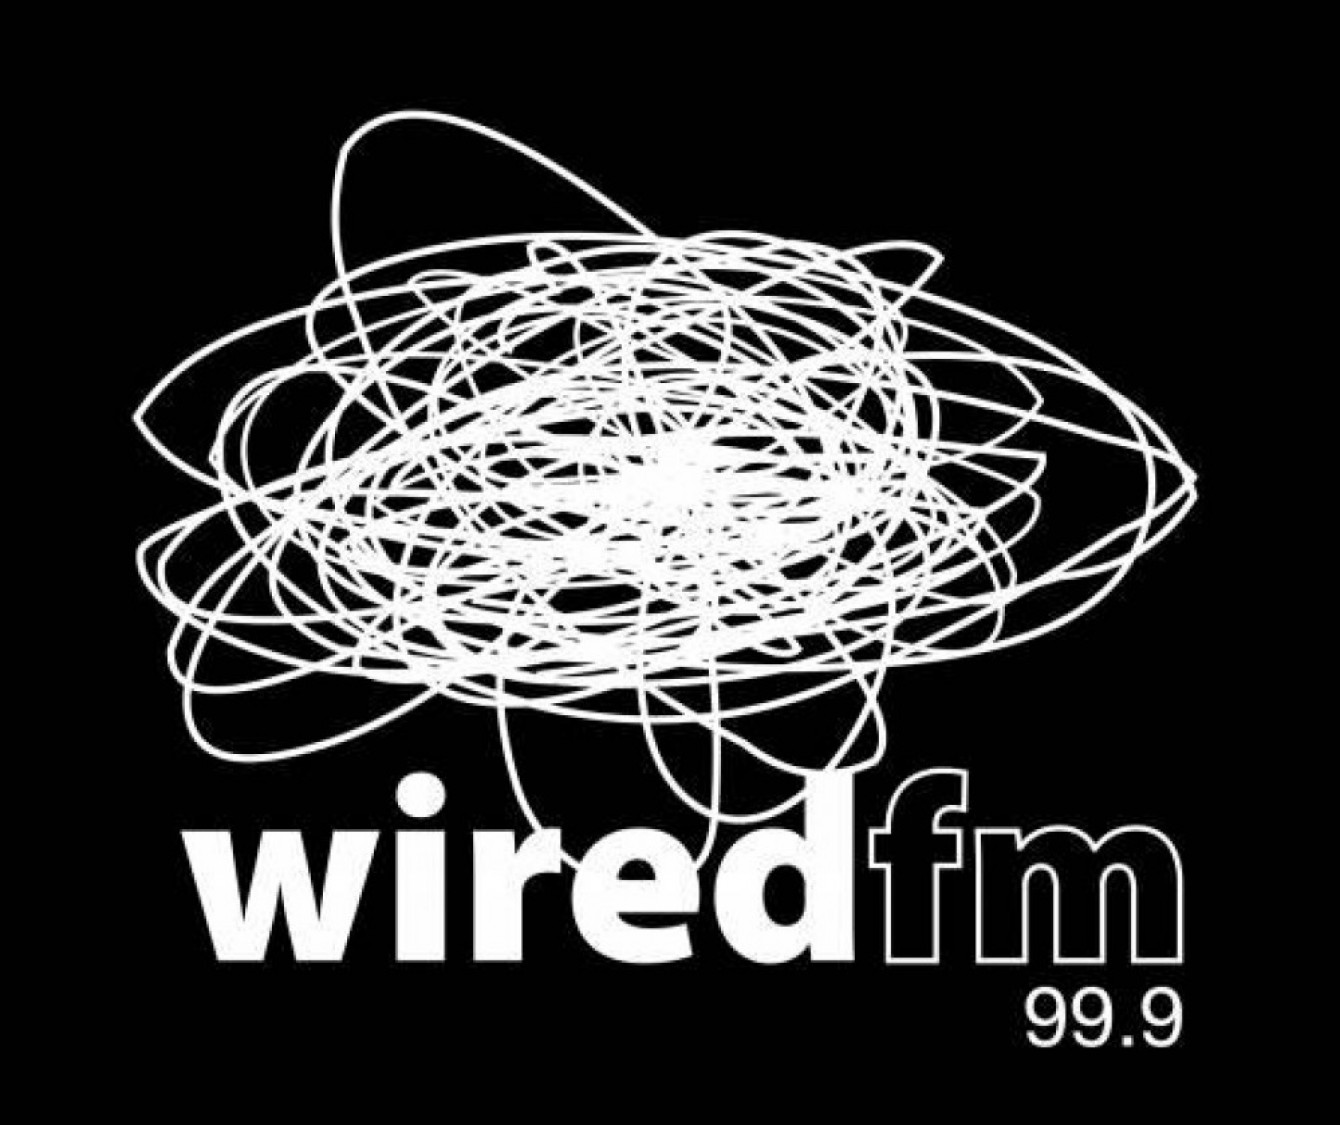 Wired FM offers free media course to marginalised groups